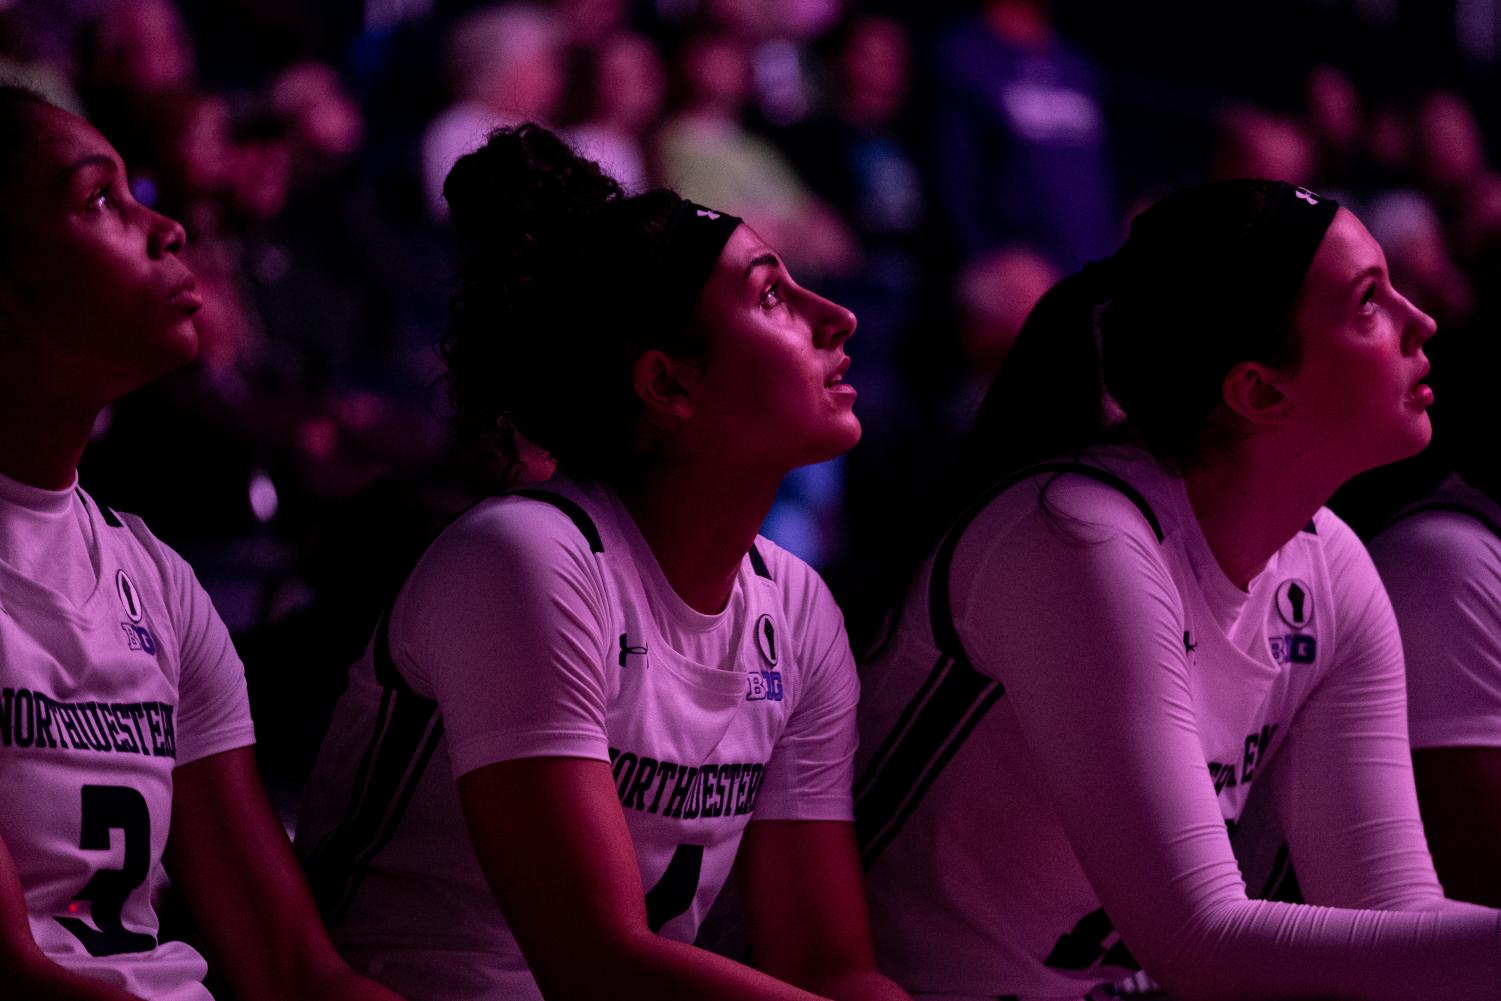 Three athletes sit and look up in dim purple lighting.